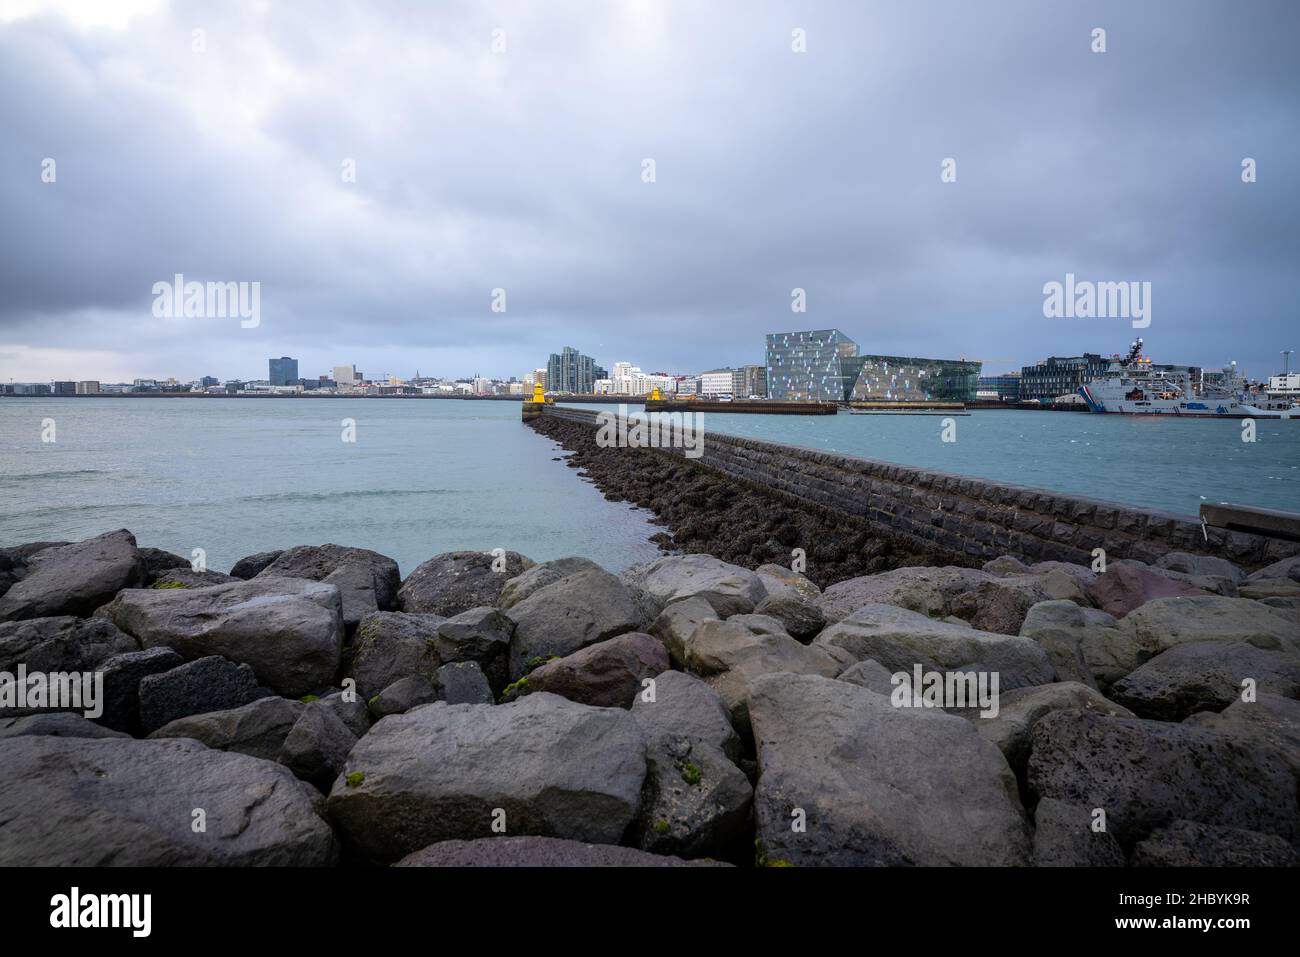 Reykjavick Harbour wall in Iceland Stock Photo